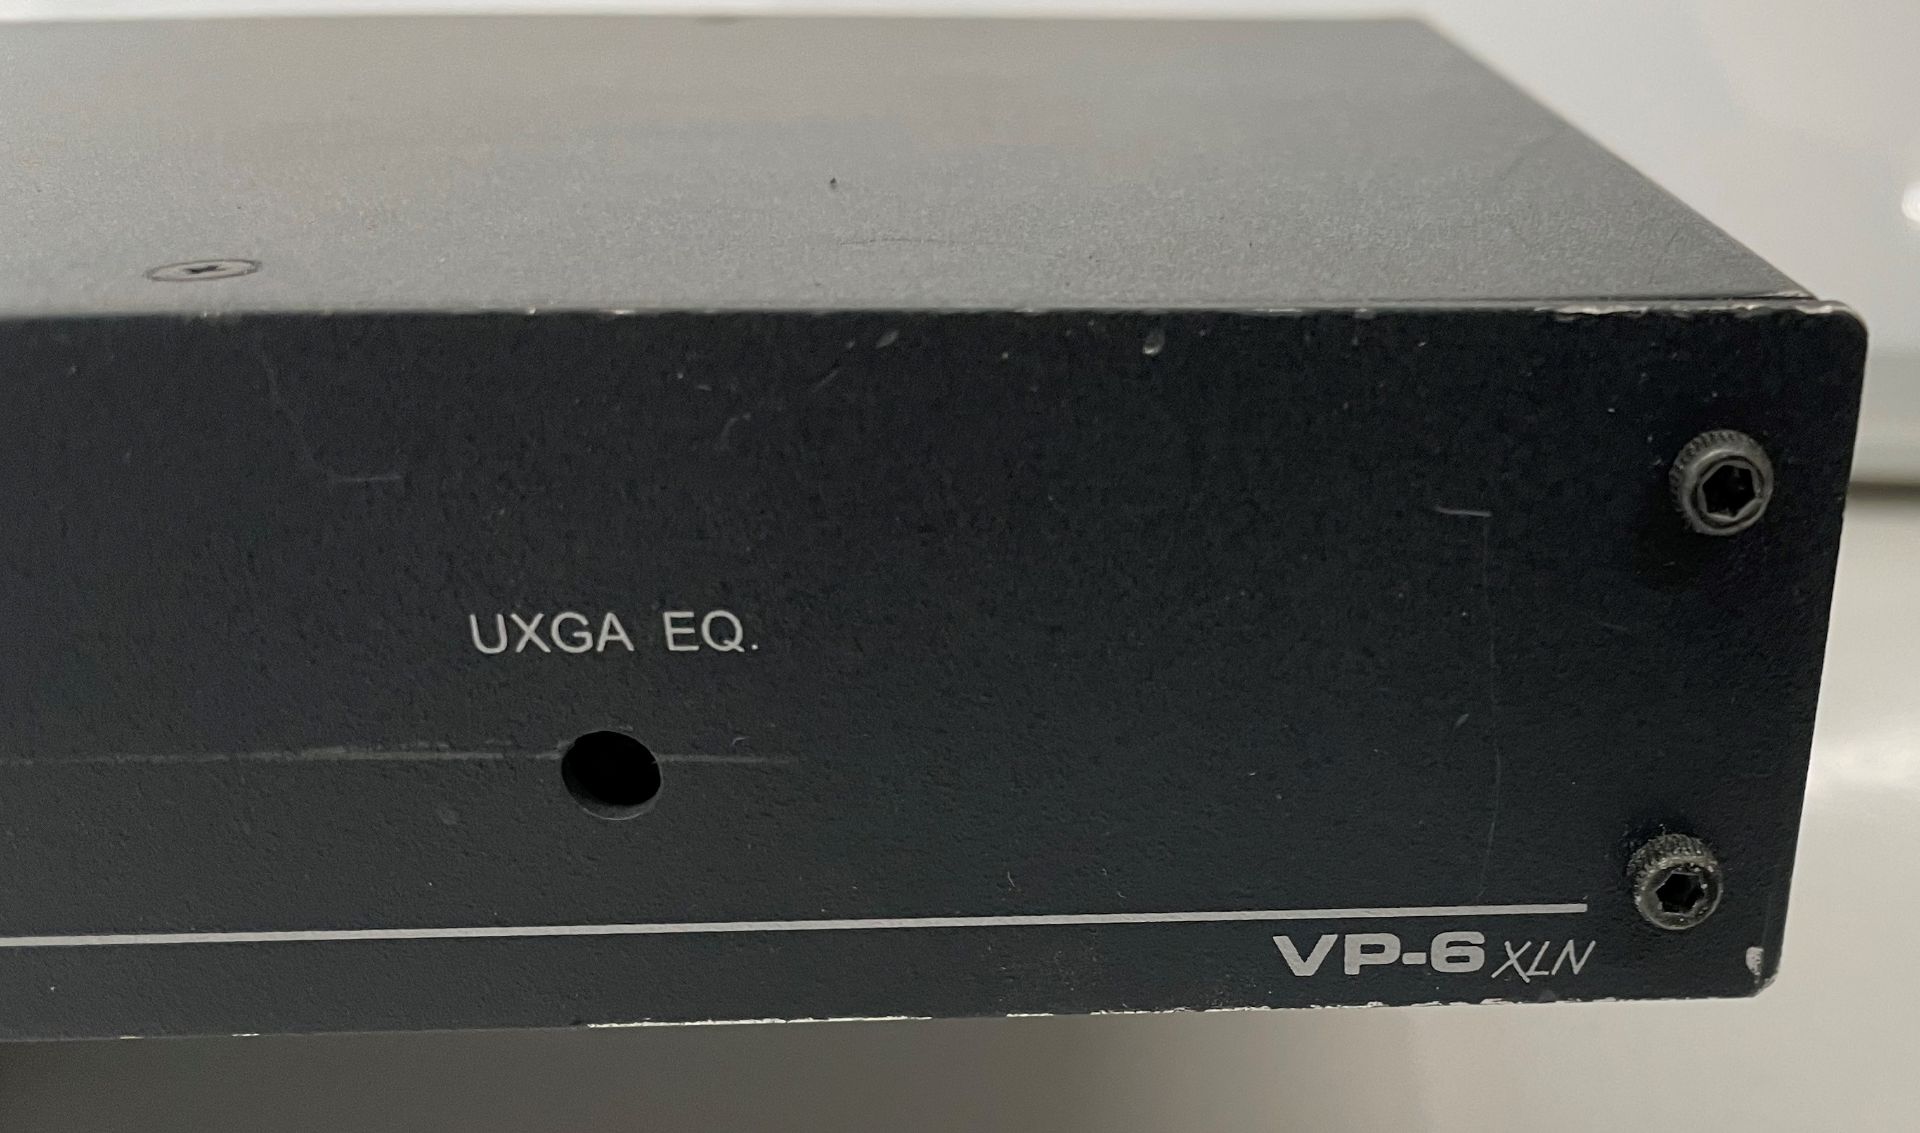 A Kramer VP-6 XLN UXGA 1:6 Distribution Amplifier (ex hire, used condition)-located at Pro Event - Image 2 of 3